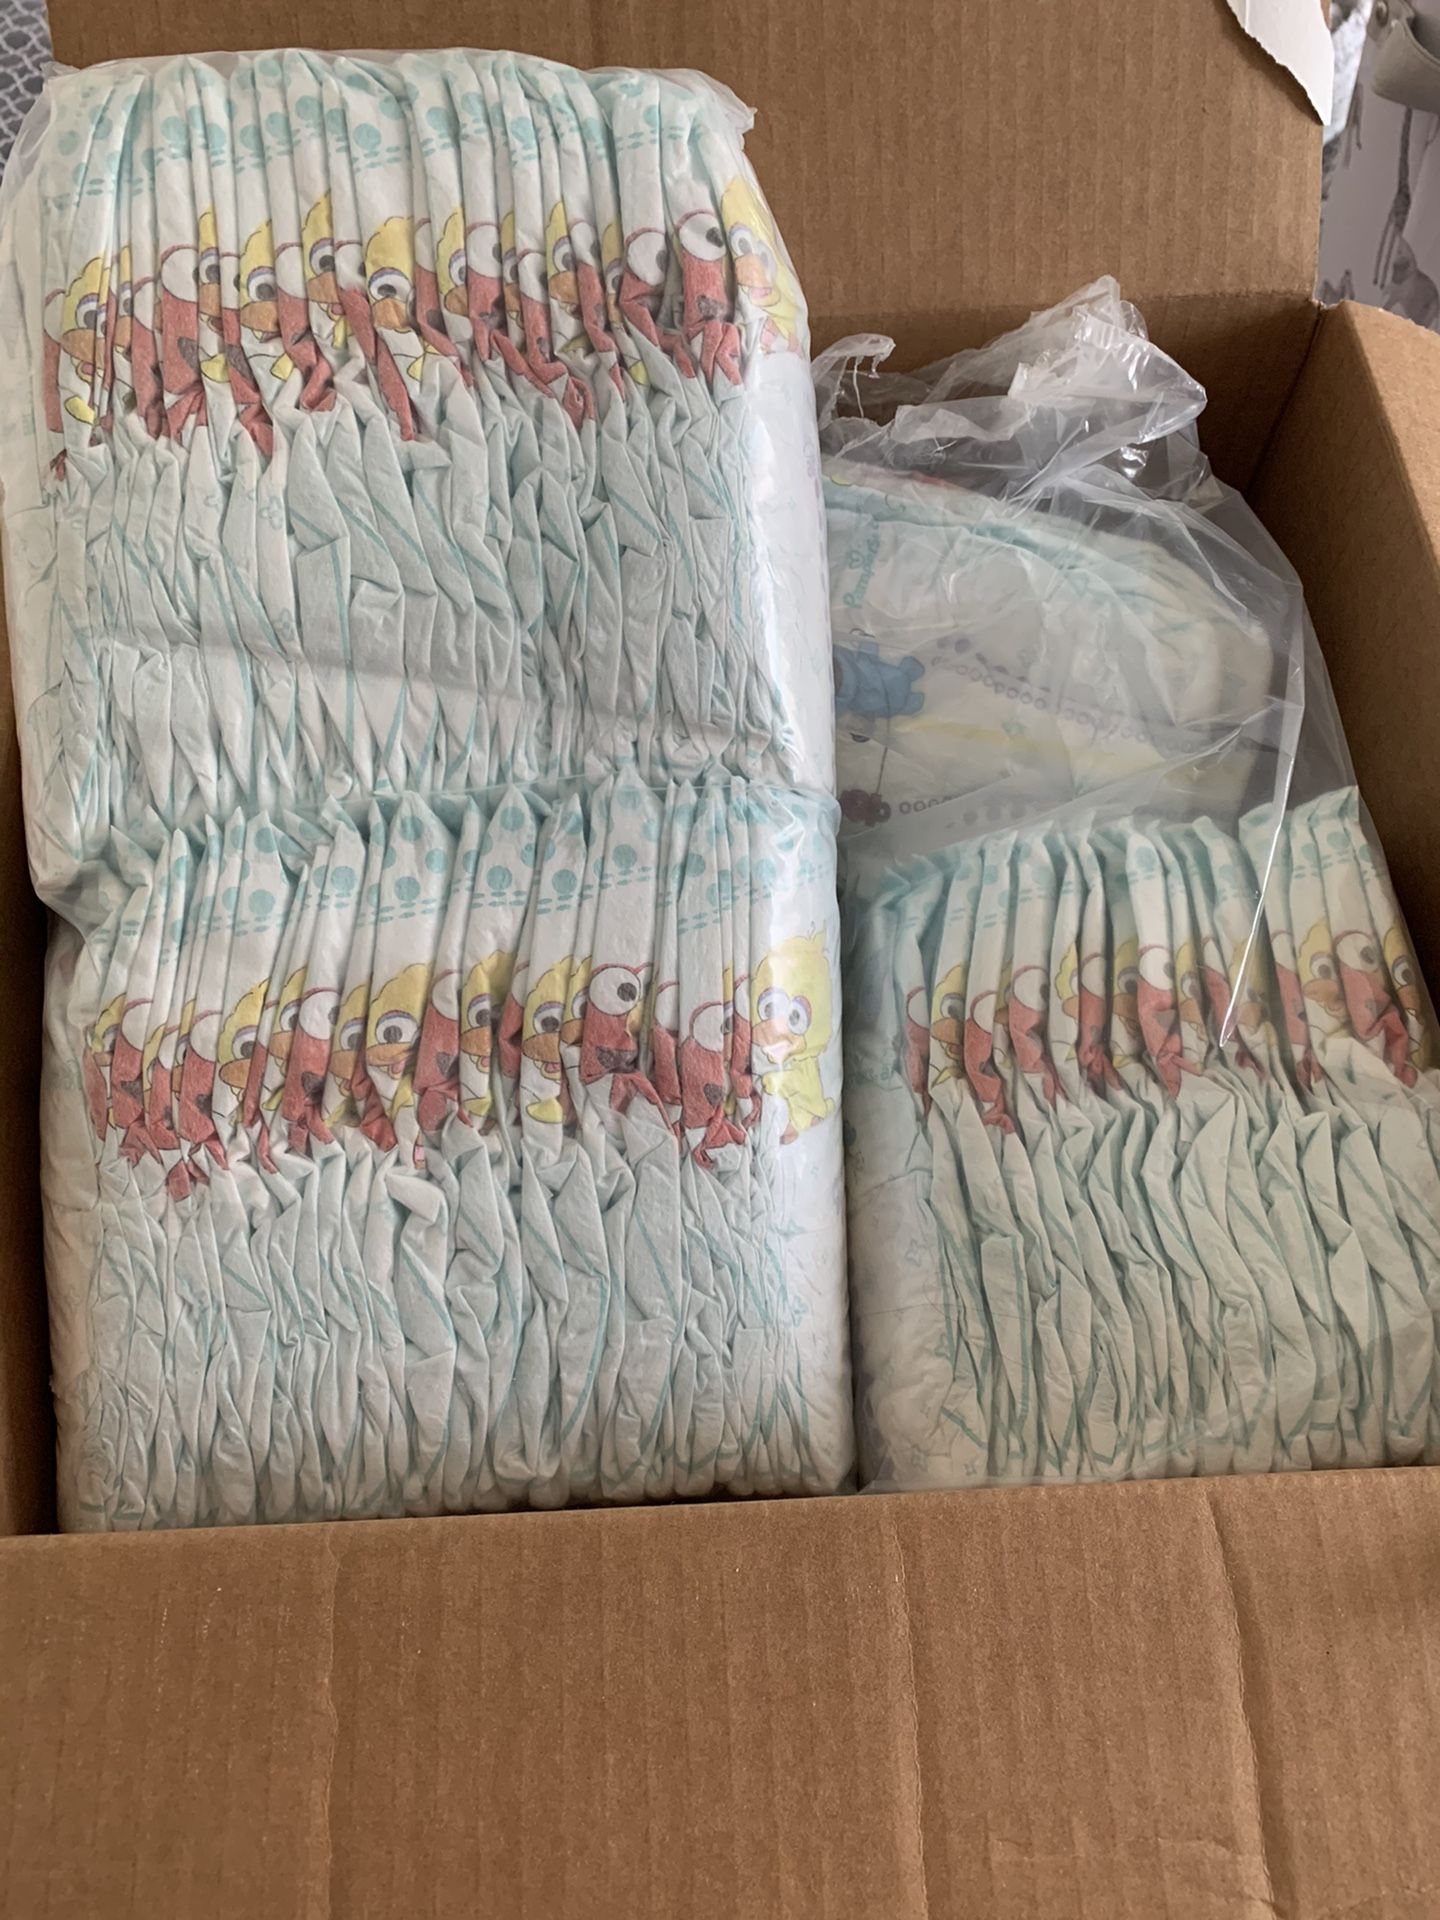 Diapers 0-2 months